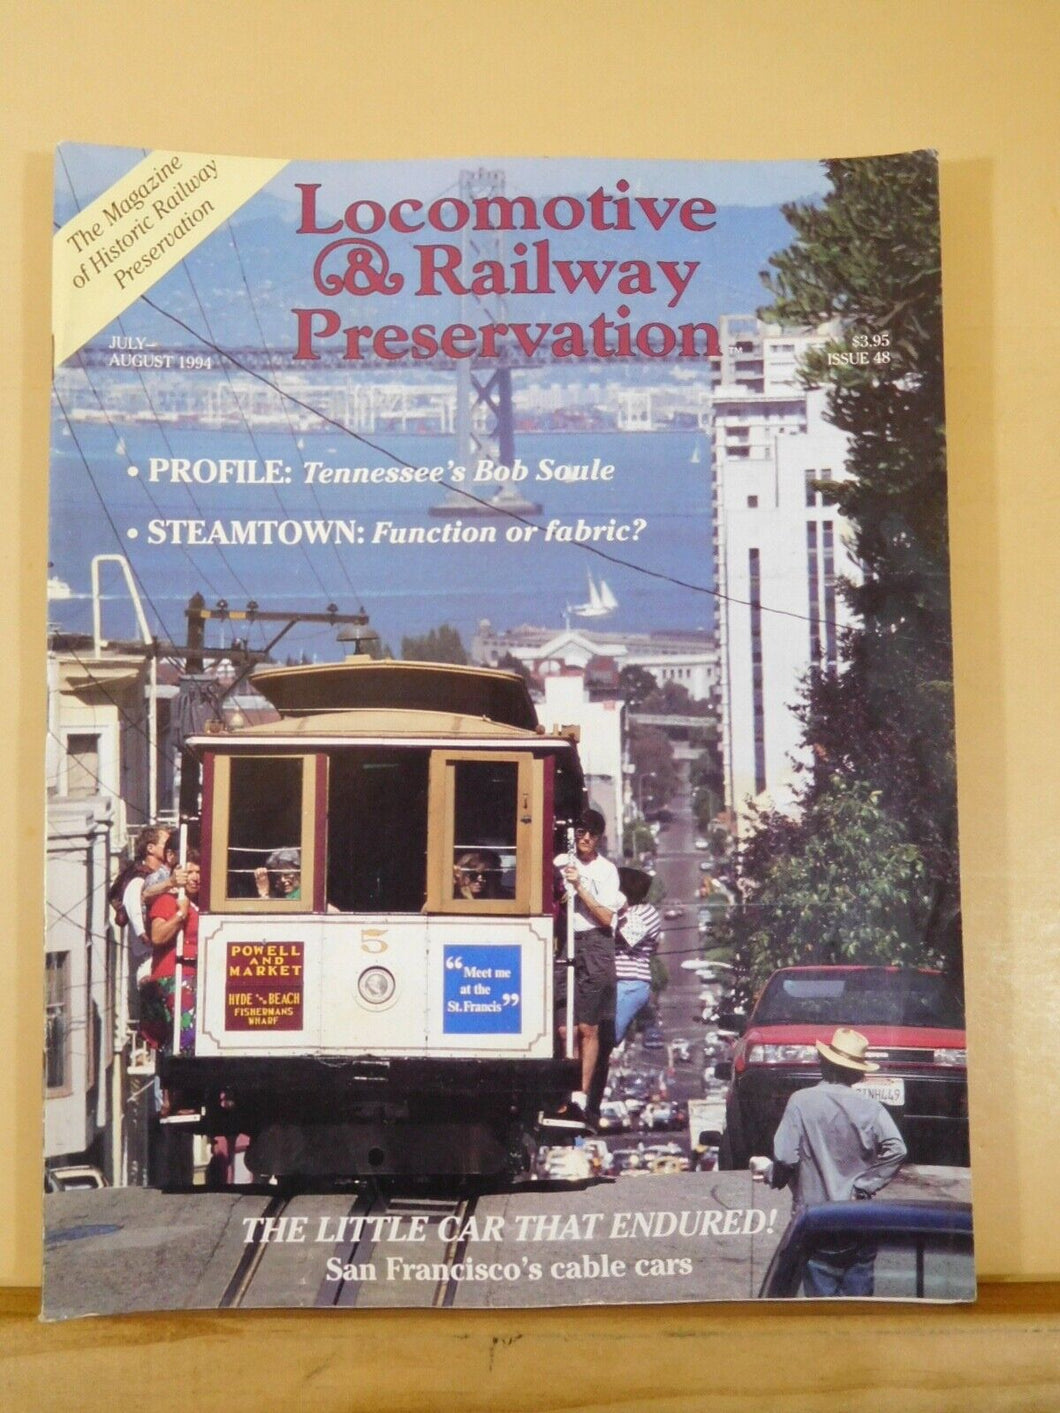 Locomotive & Railway Preservation #48 1994 July August San Francisco's cable car